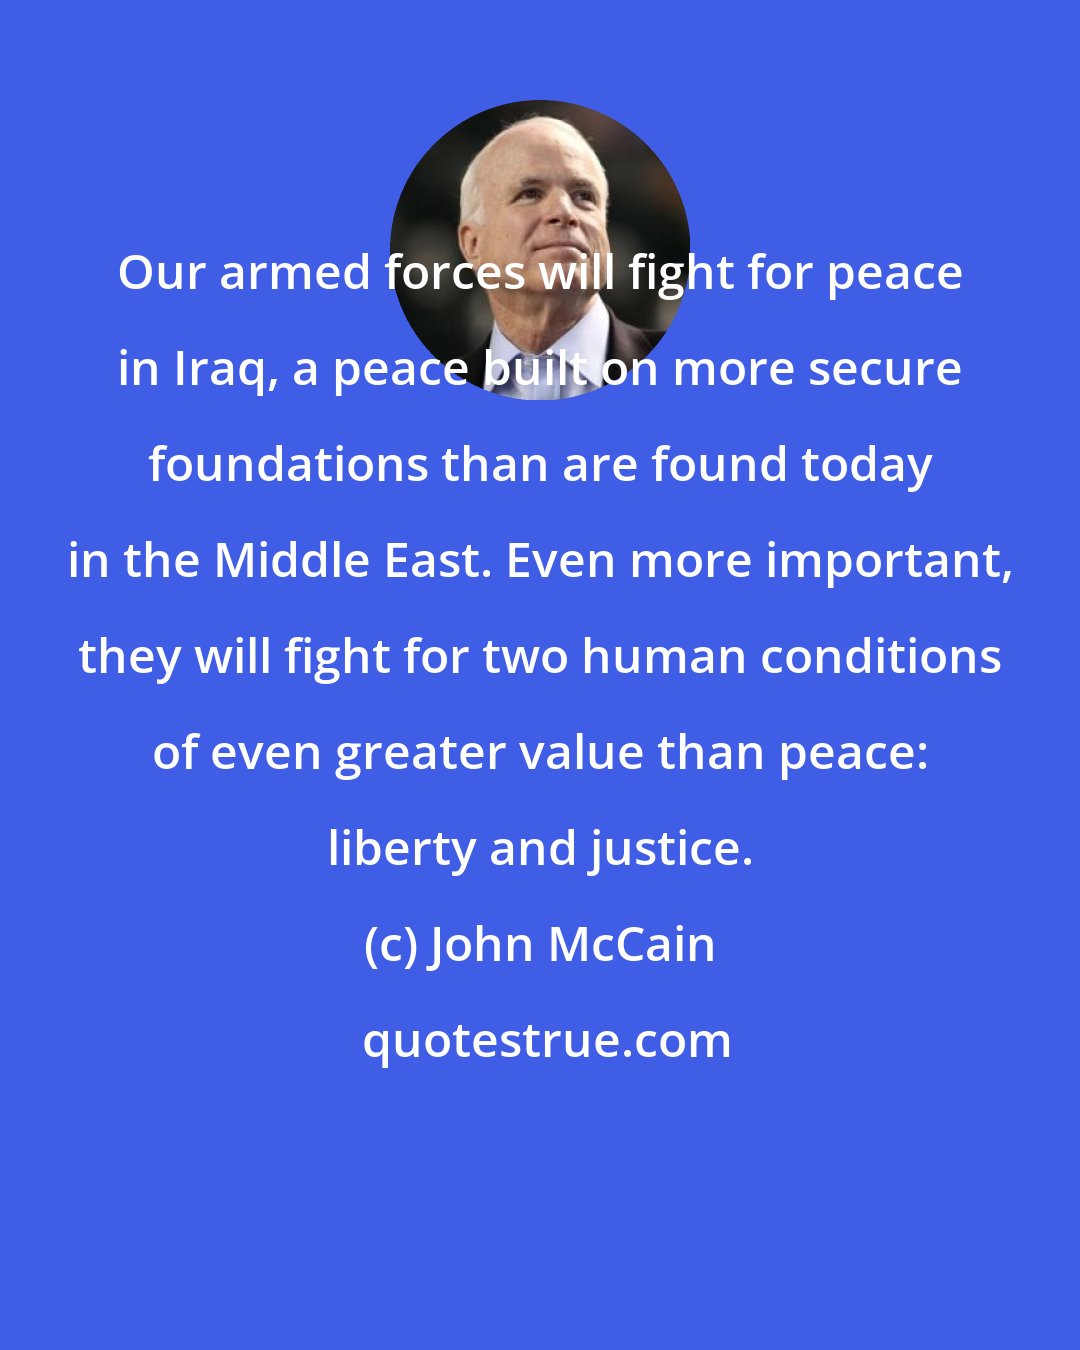 John McCain: Our armed forces will fight for peace in Iraq, a peace built on more secure foundations than are found today in the Middle East. Even more important, they will fight for two human conditions of even greater value than peace: liberty and justice.